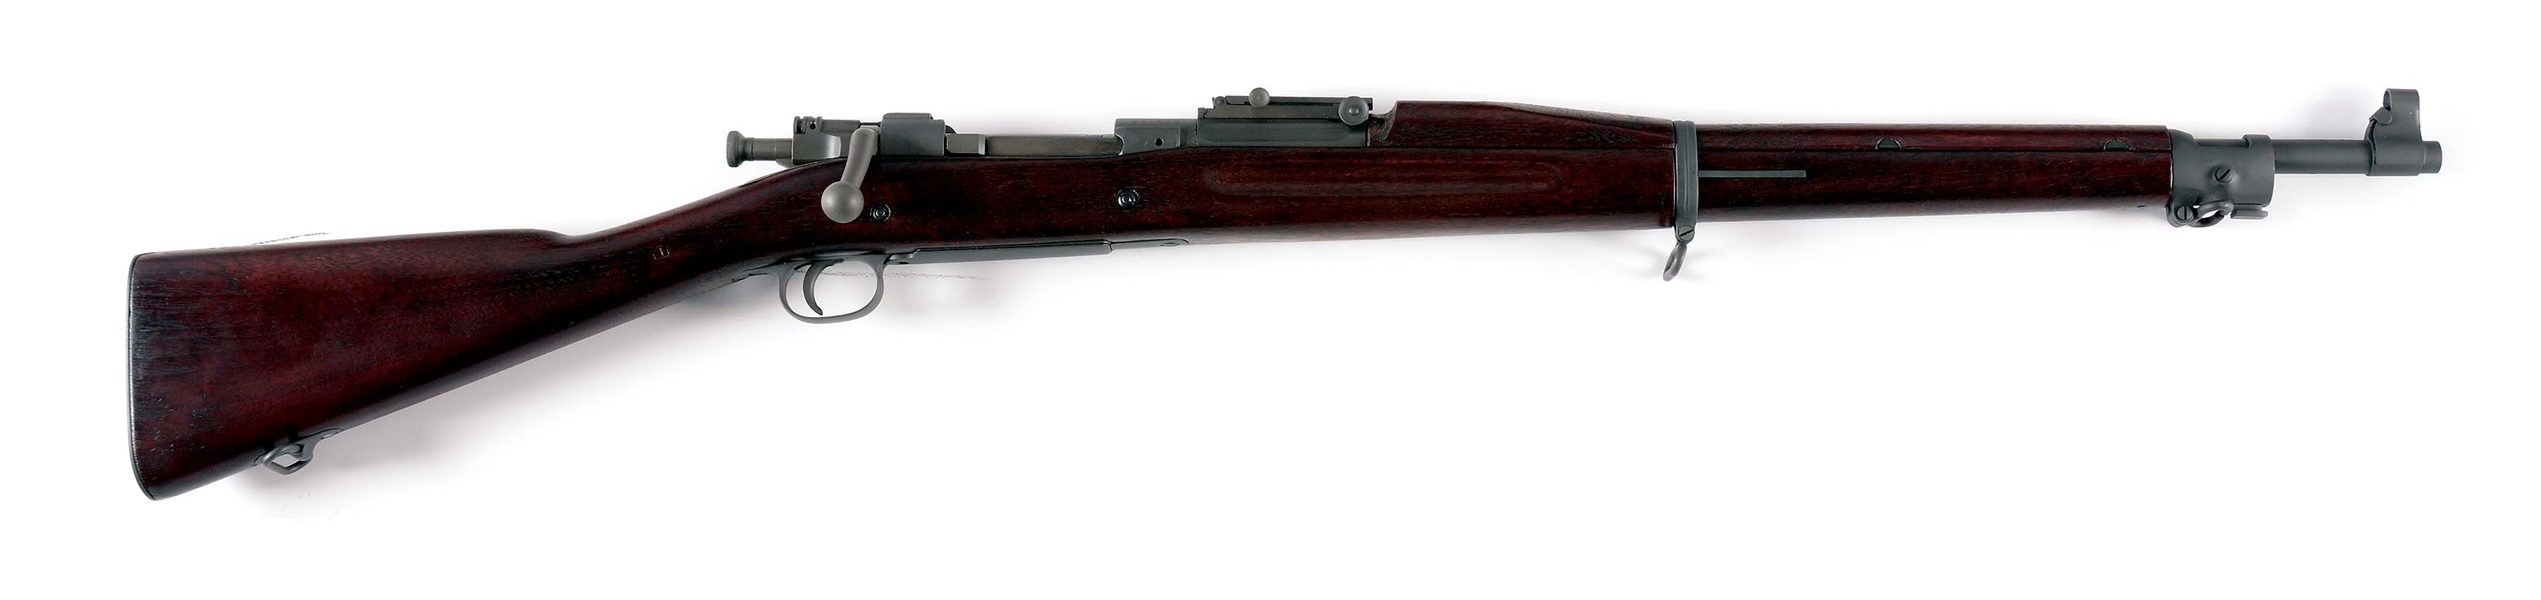 (C) SPRINGFIELD ARMORY MODEL 1903 BOLT ACTION RIFLE (1918).